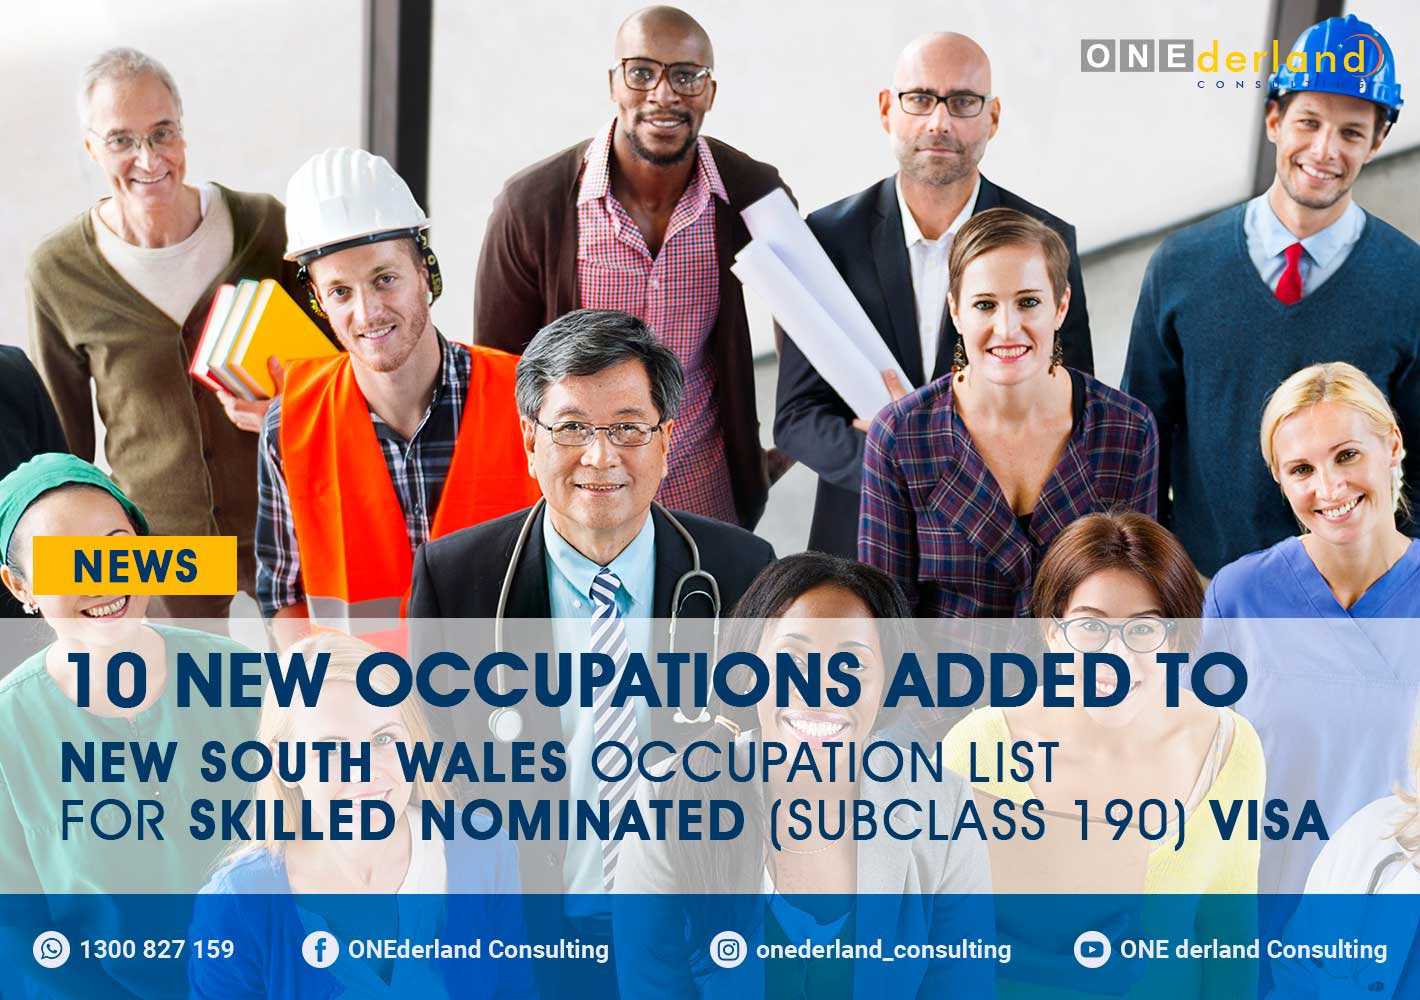 New Occupations Equal New Chance for Visa 190 Applicant!